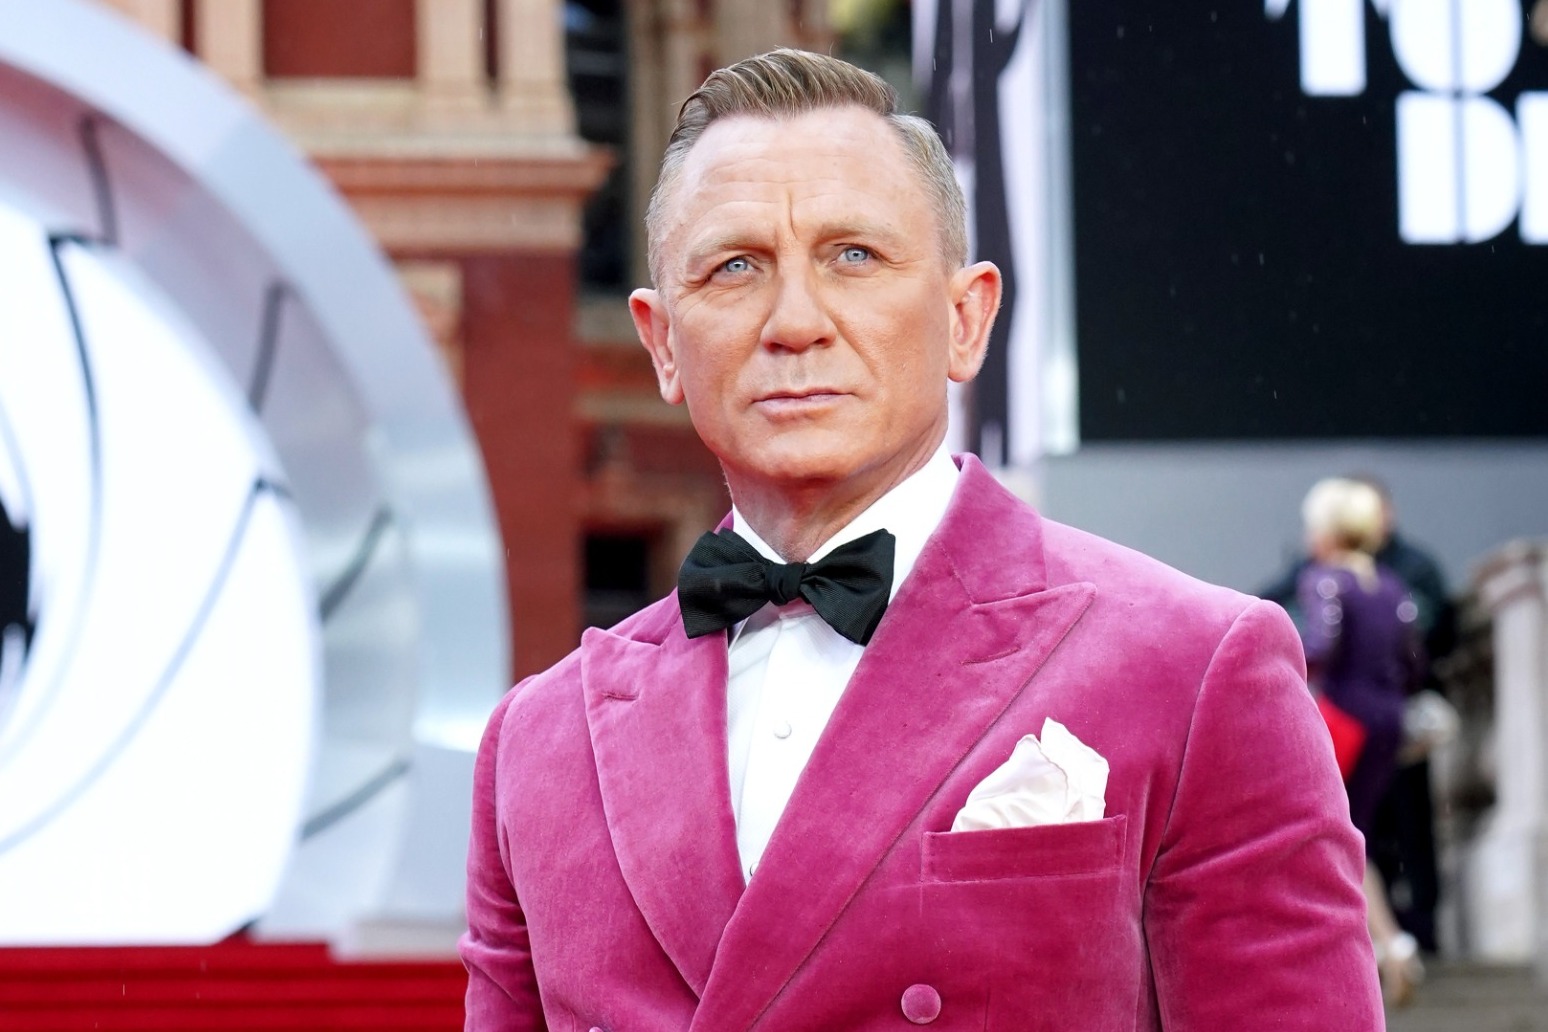 Daniel Craig said he knew there was no going back after accepting Bond role thumbnail